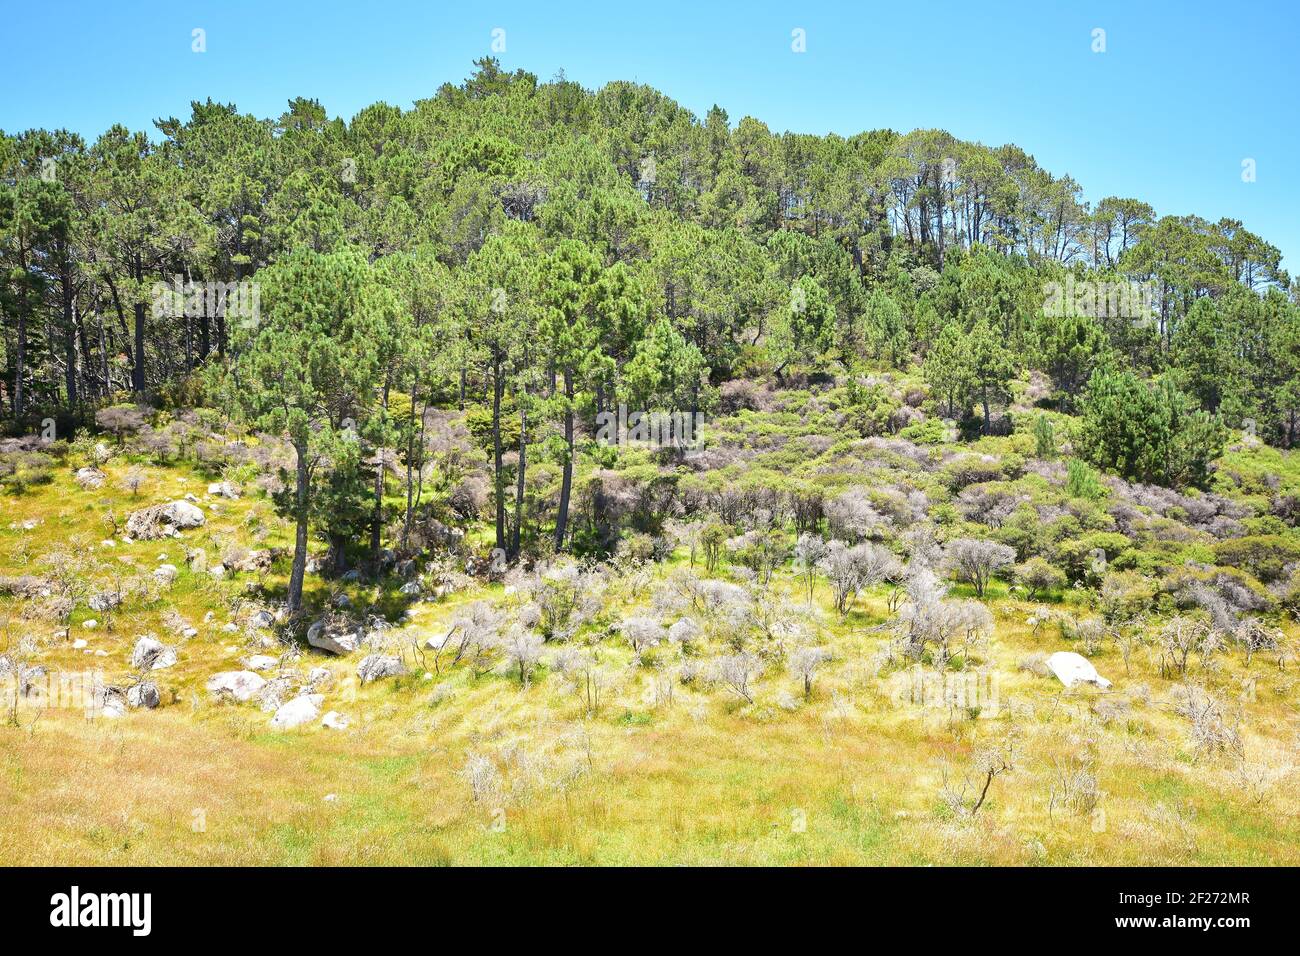 Rocky paddock with dry shrubs and pine trees in bright summer sun. Stock Photo